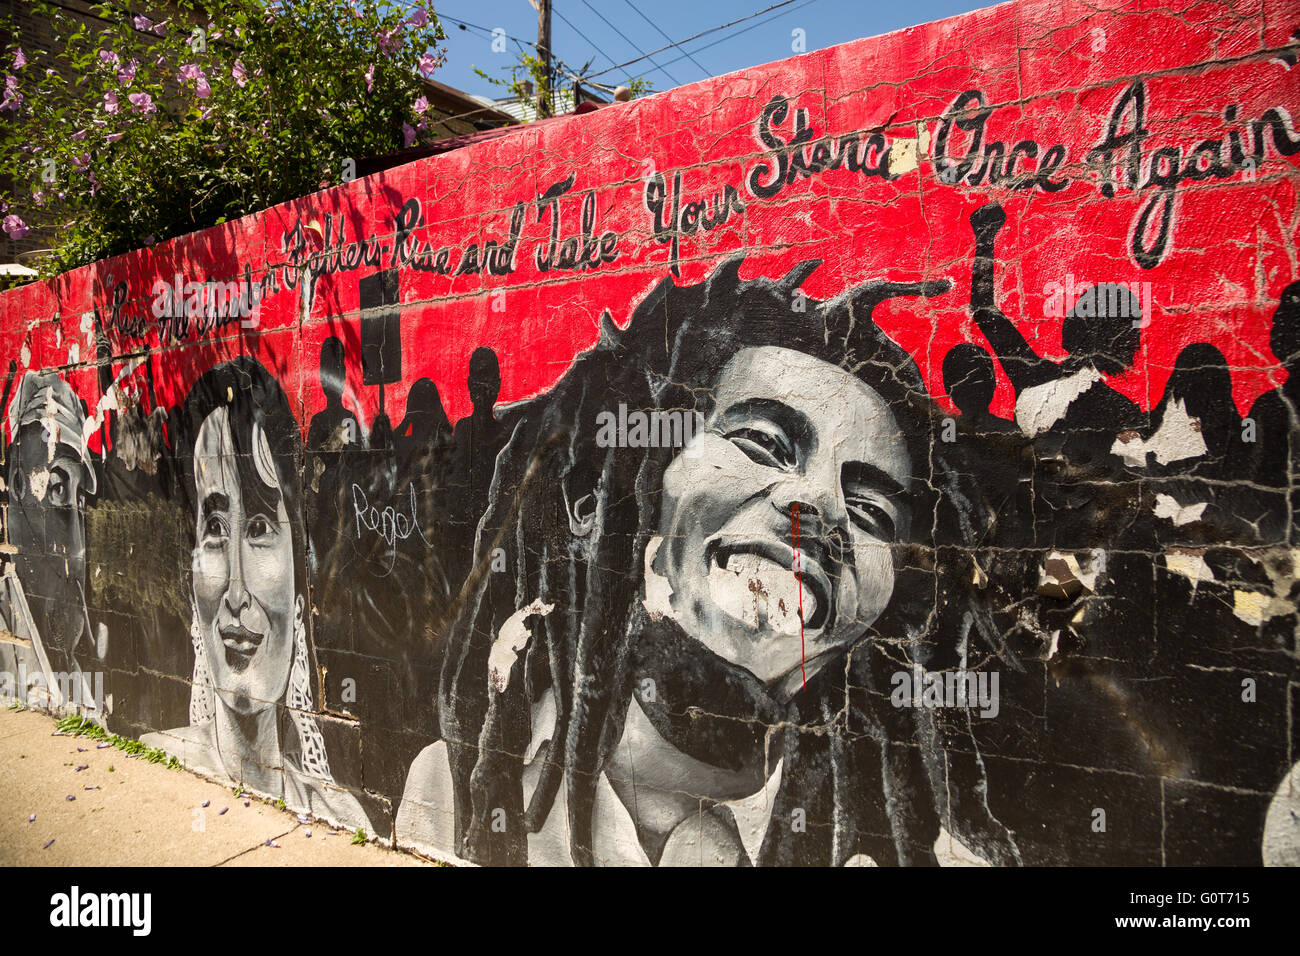 Bob Marley with Benazir Bhutto Rise All Freedom Fighters street mural on a wall in the trendy Wicker Park neighborhood in the West Town community in Chicago, Illinois, USA Stock Photo